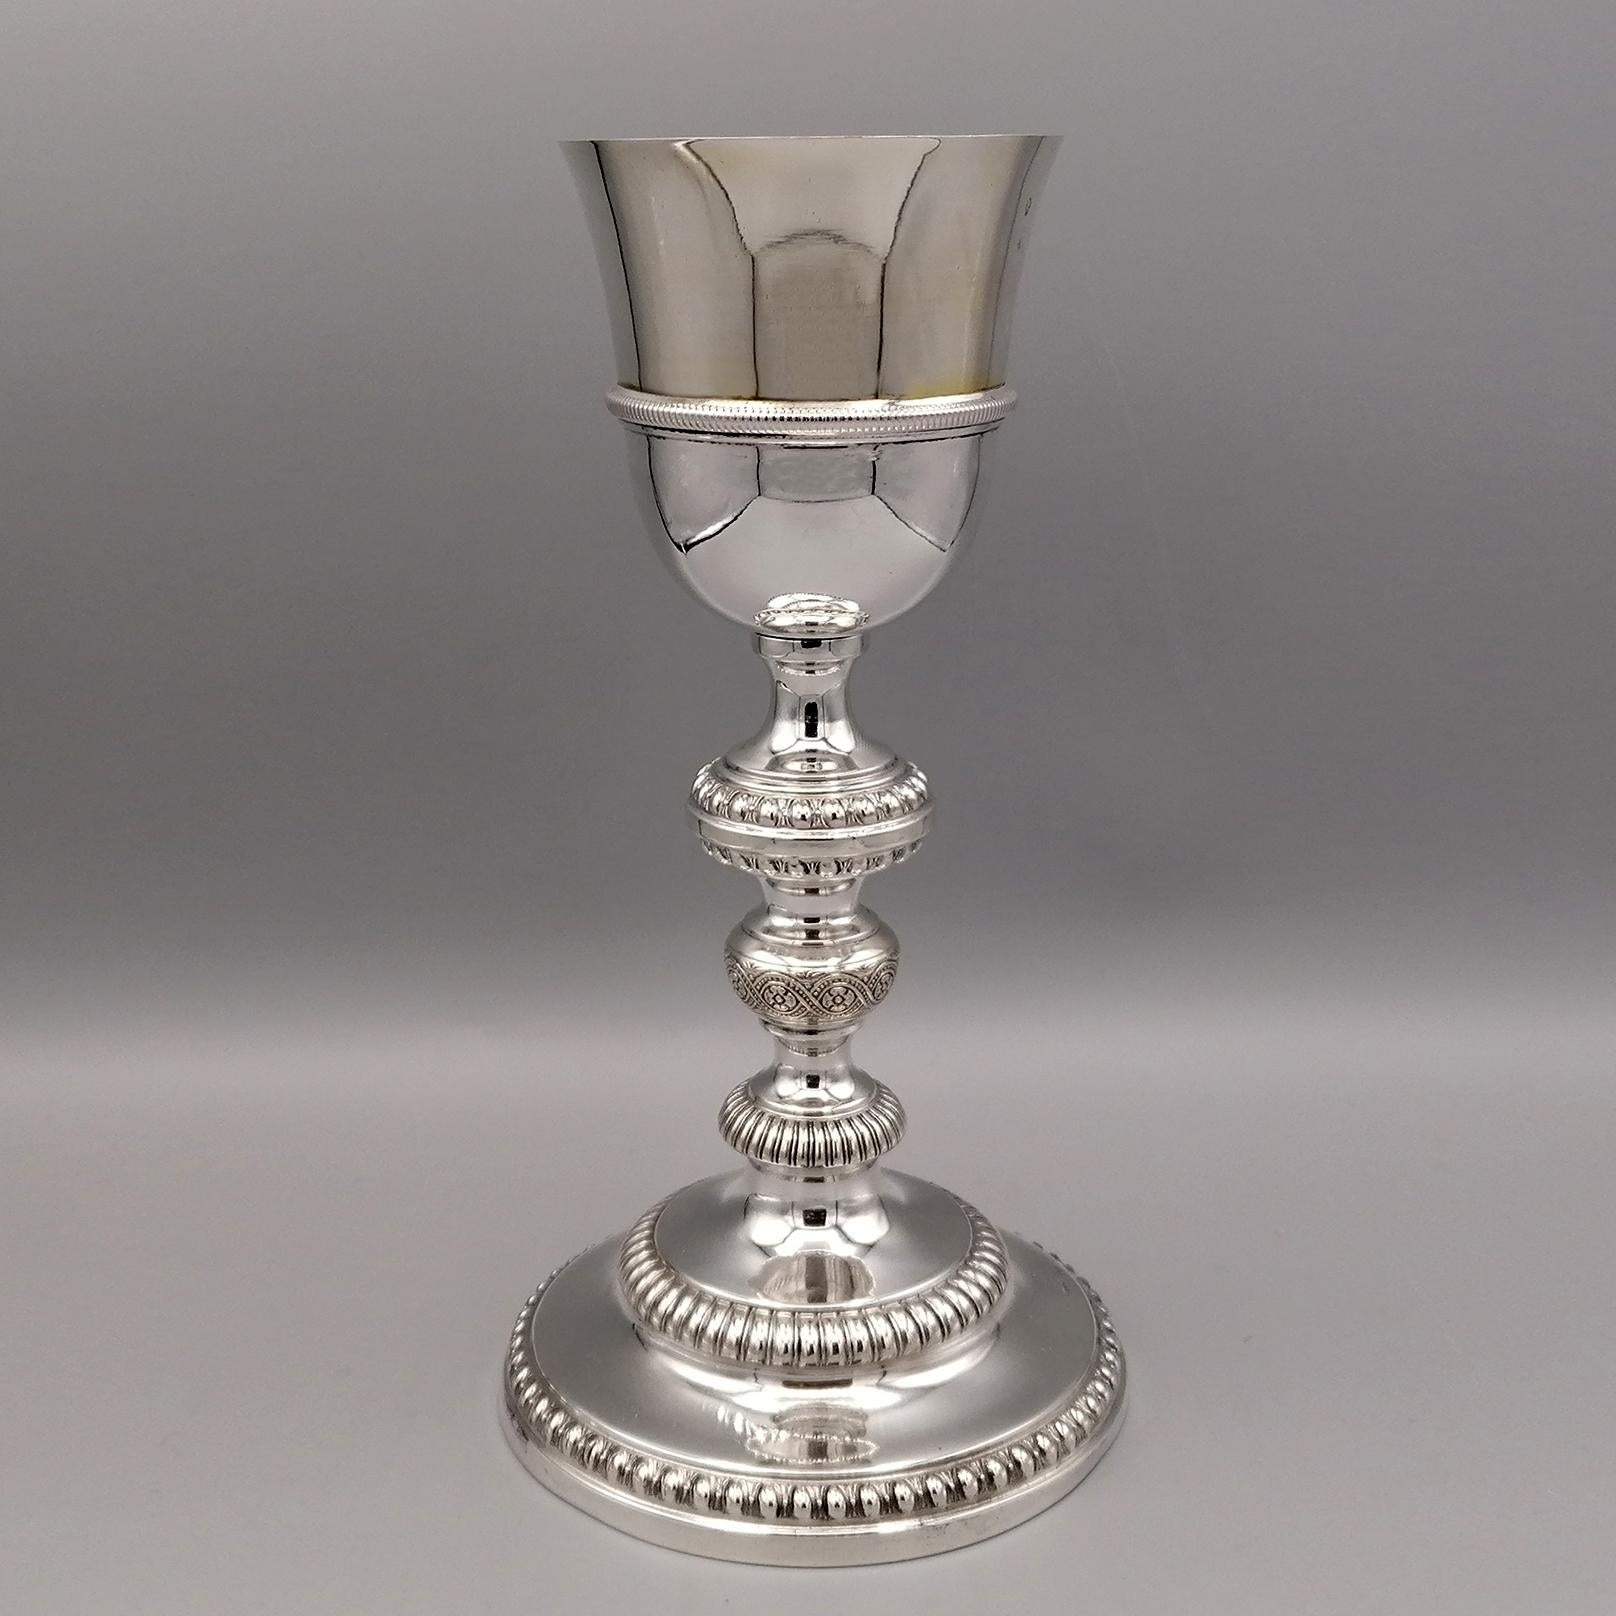 Liturgical chalice in Italian silver from the 19th century.
The chalice, very balanced in its shapes, has edges with ovules both on the base and in the stem. Also present, always on the stem, is a classic design with small flowers surrounded by a